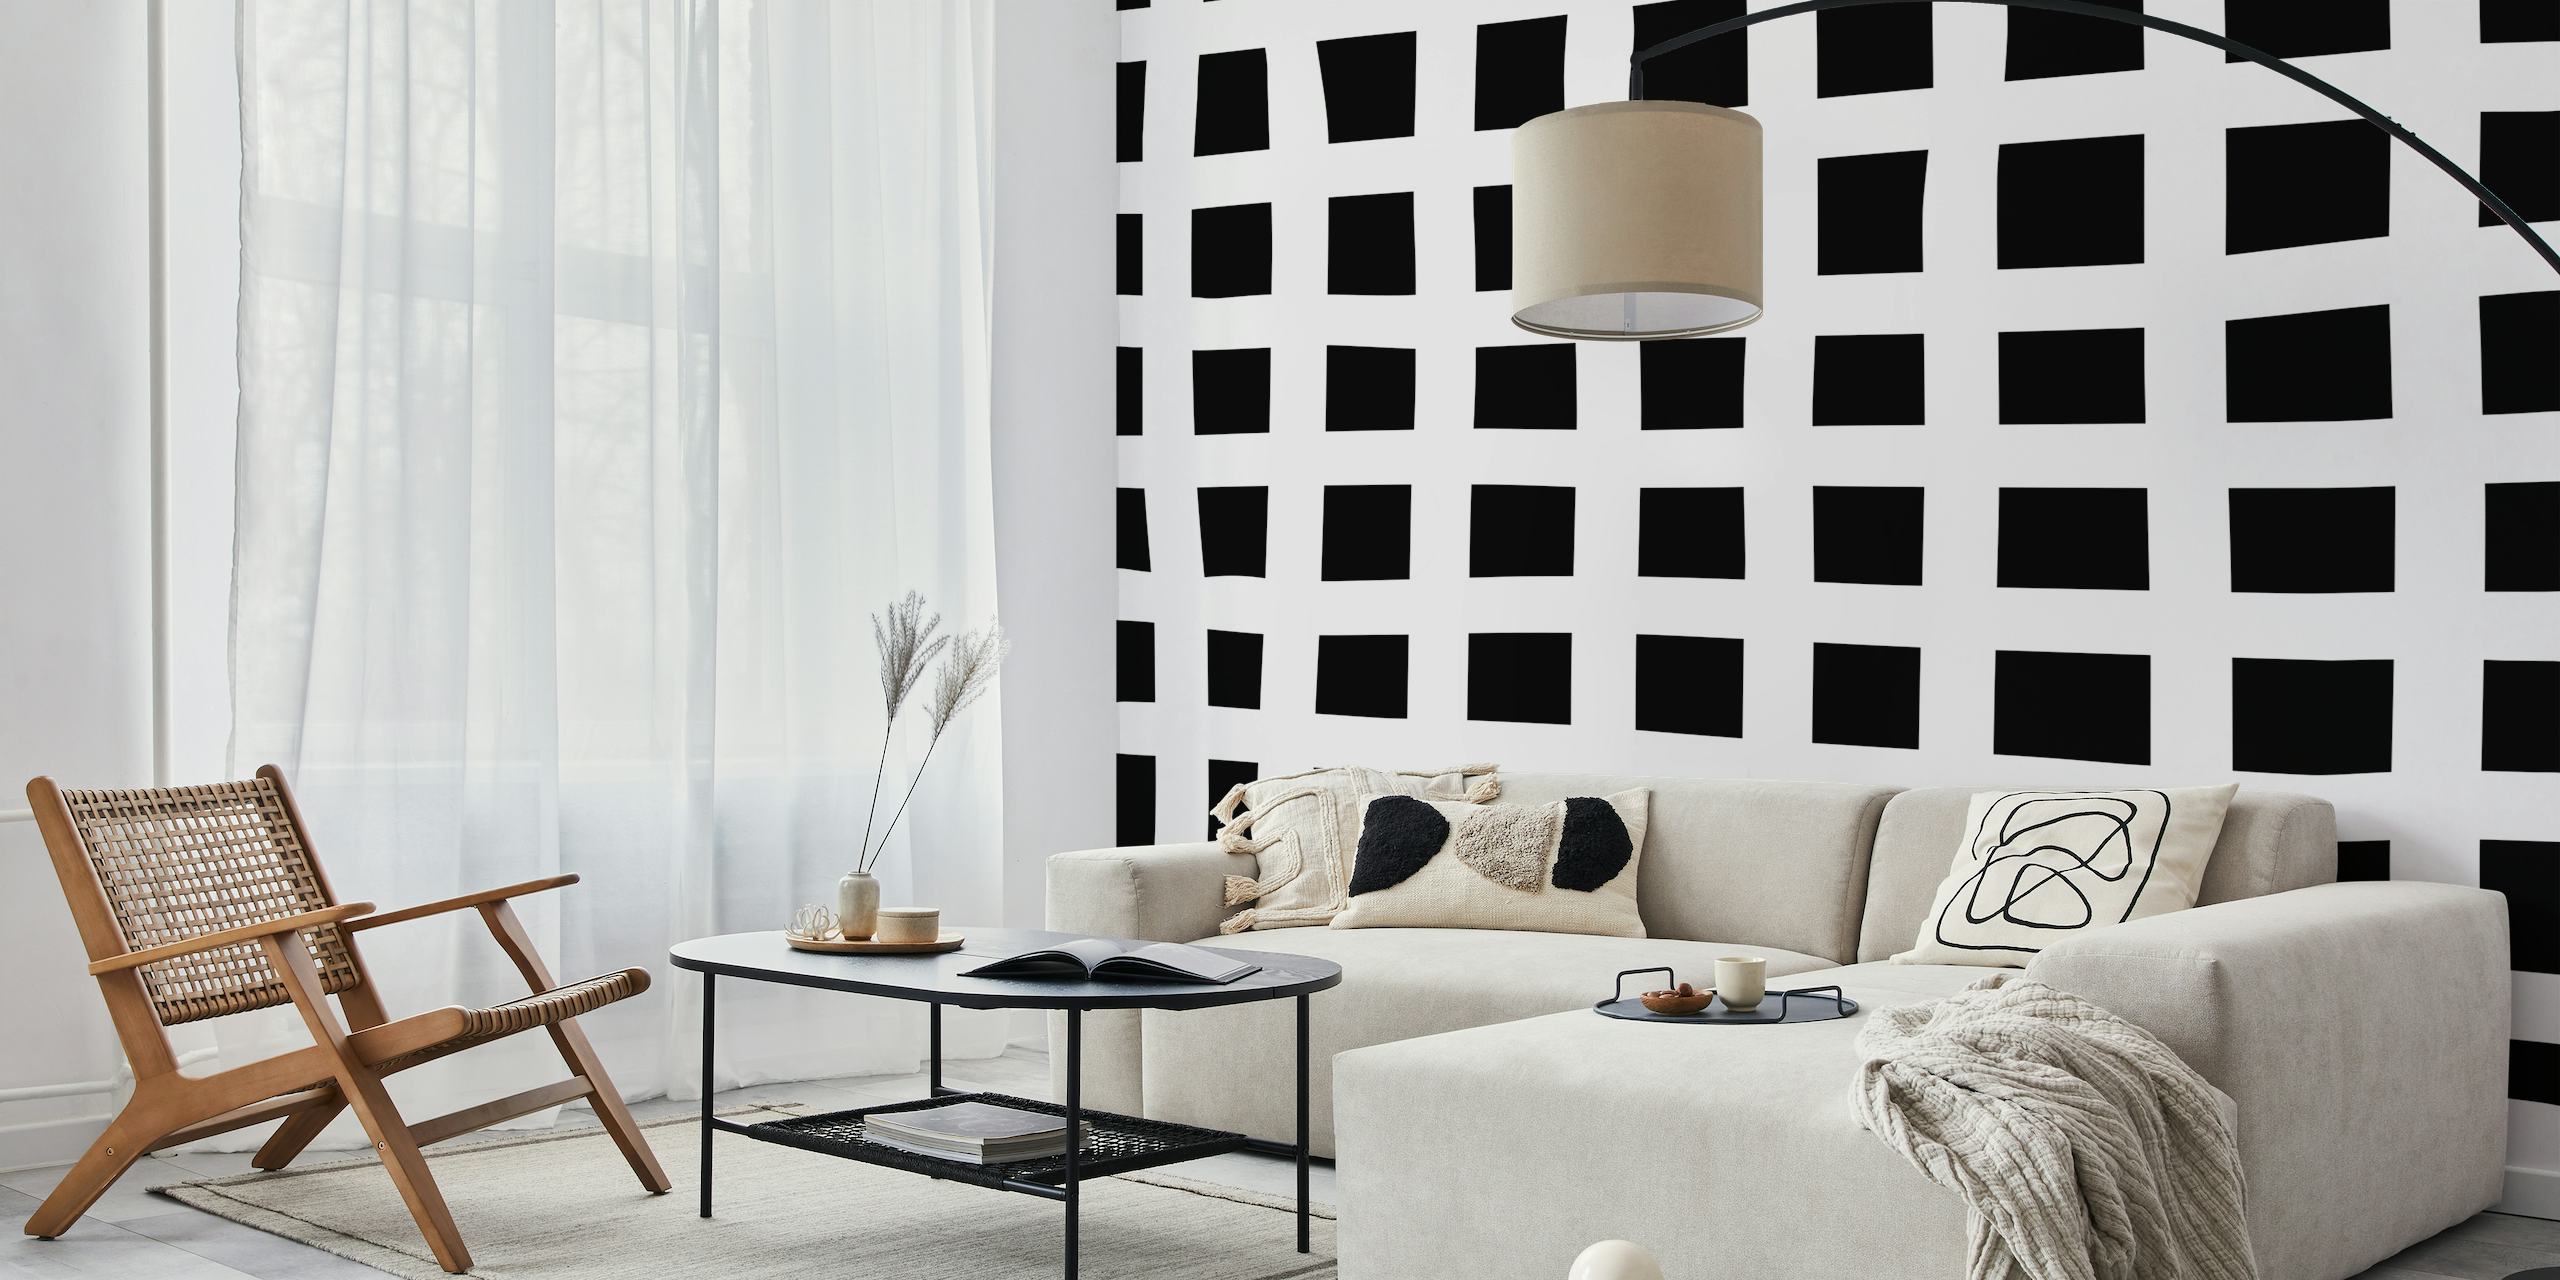 Black and white wonky check pattern wall mural